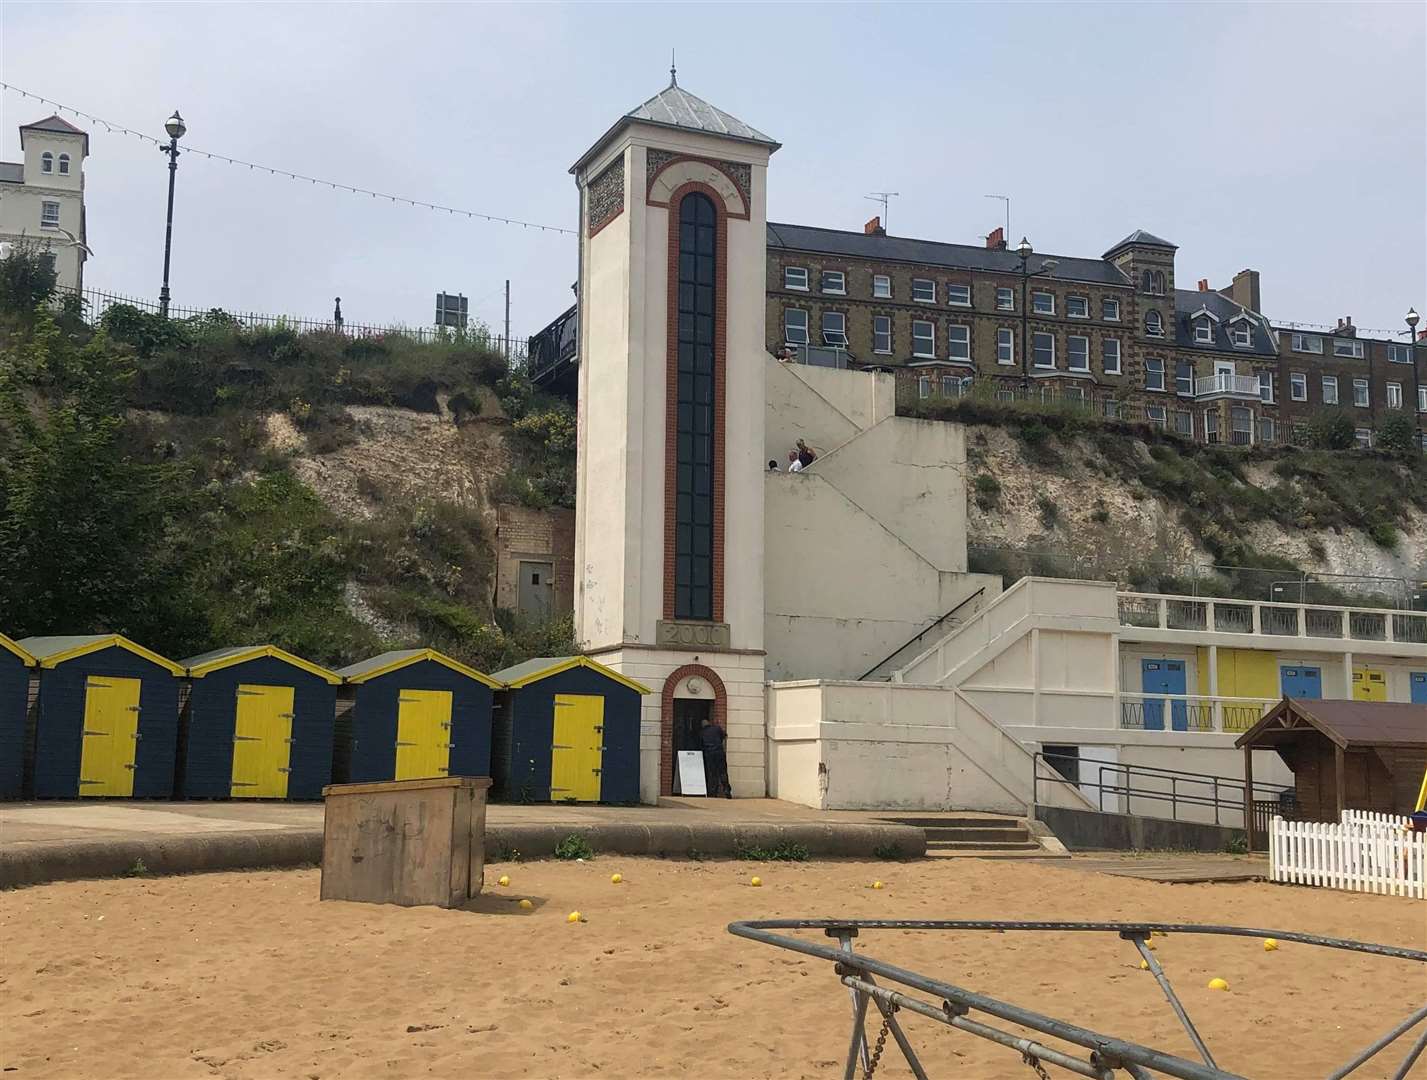 The Viking Bay lift in Broadstairs has been reopened